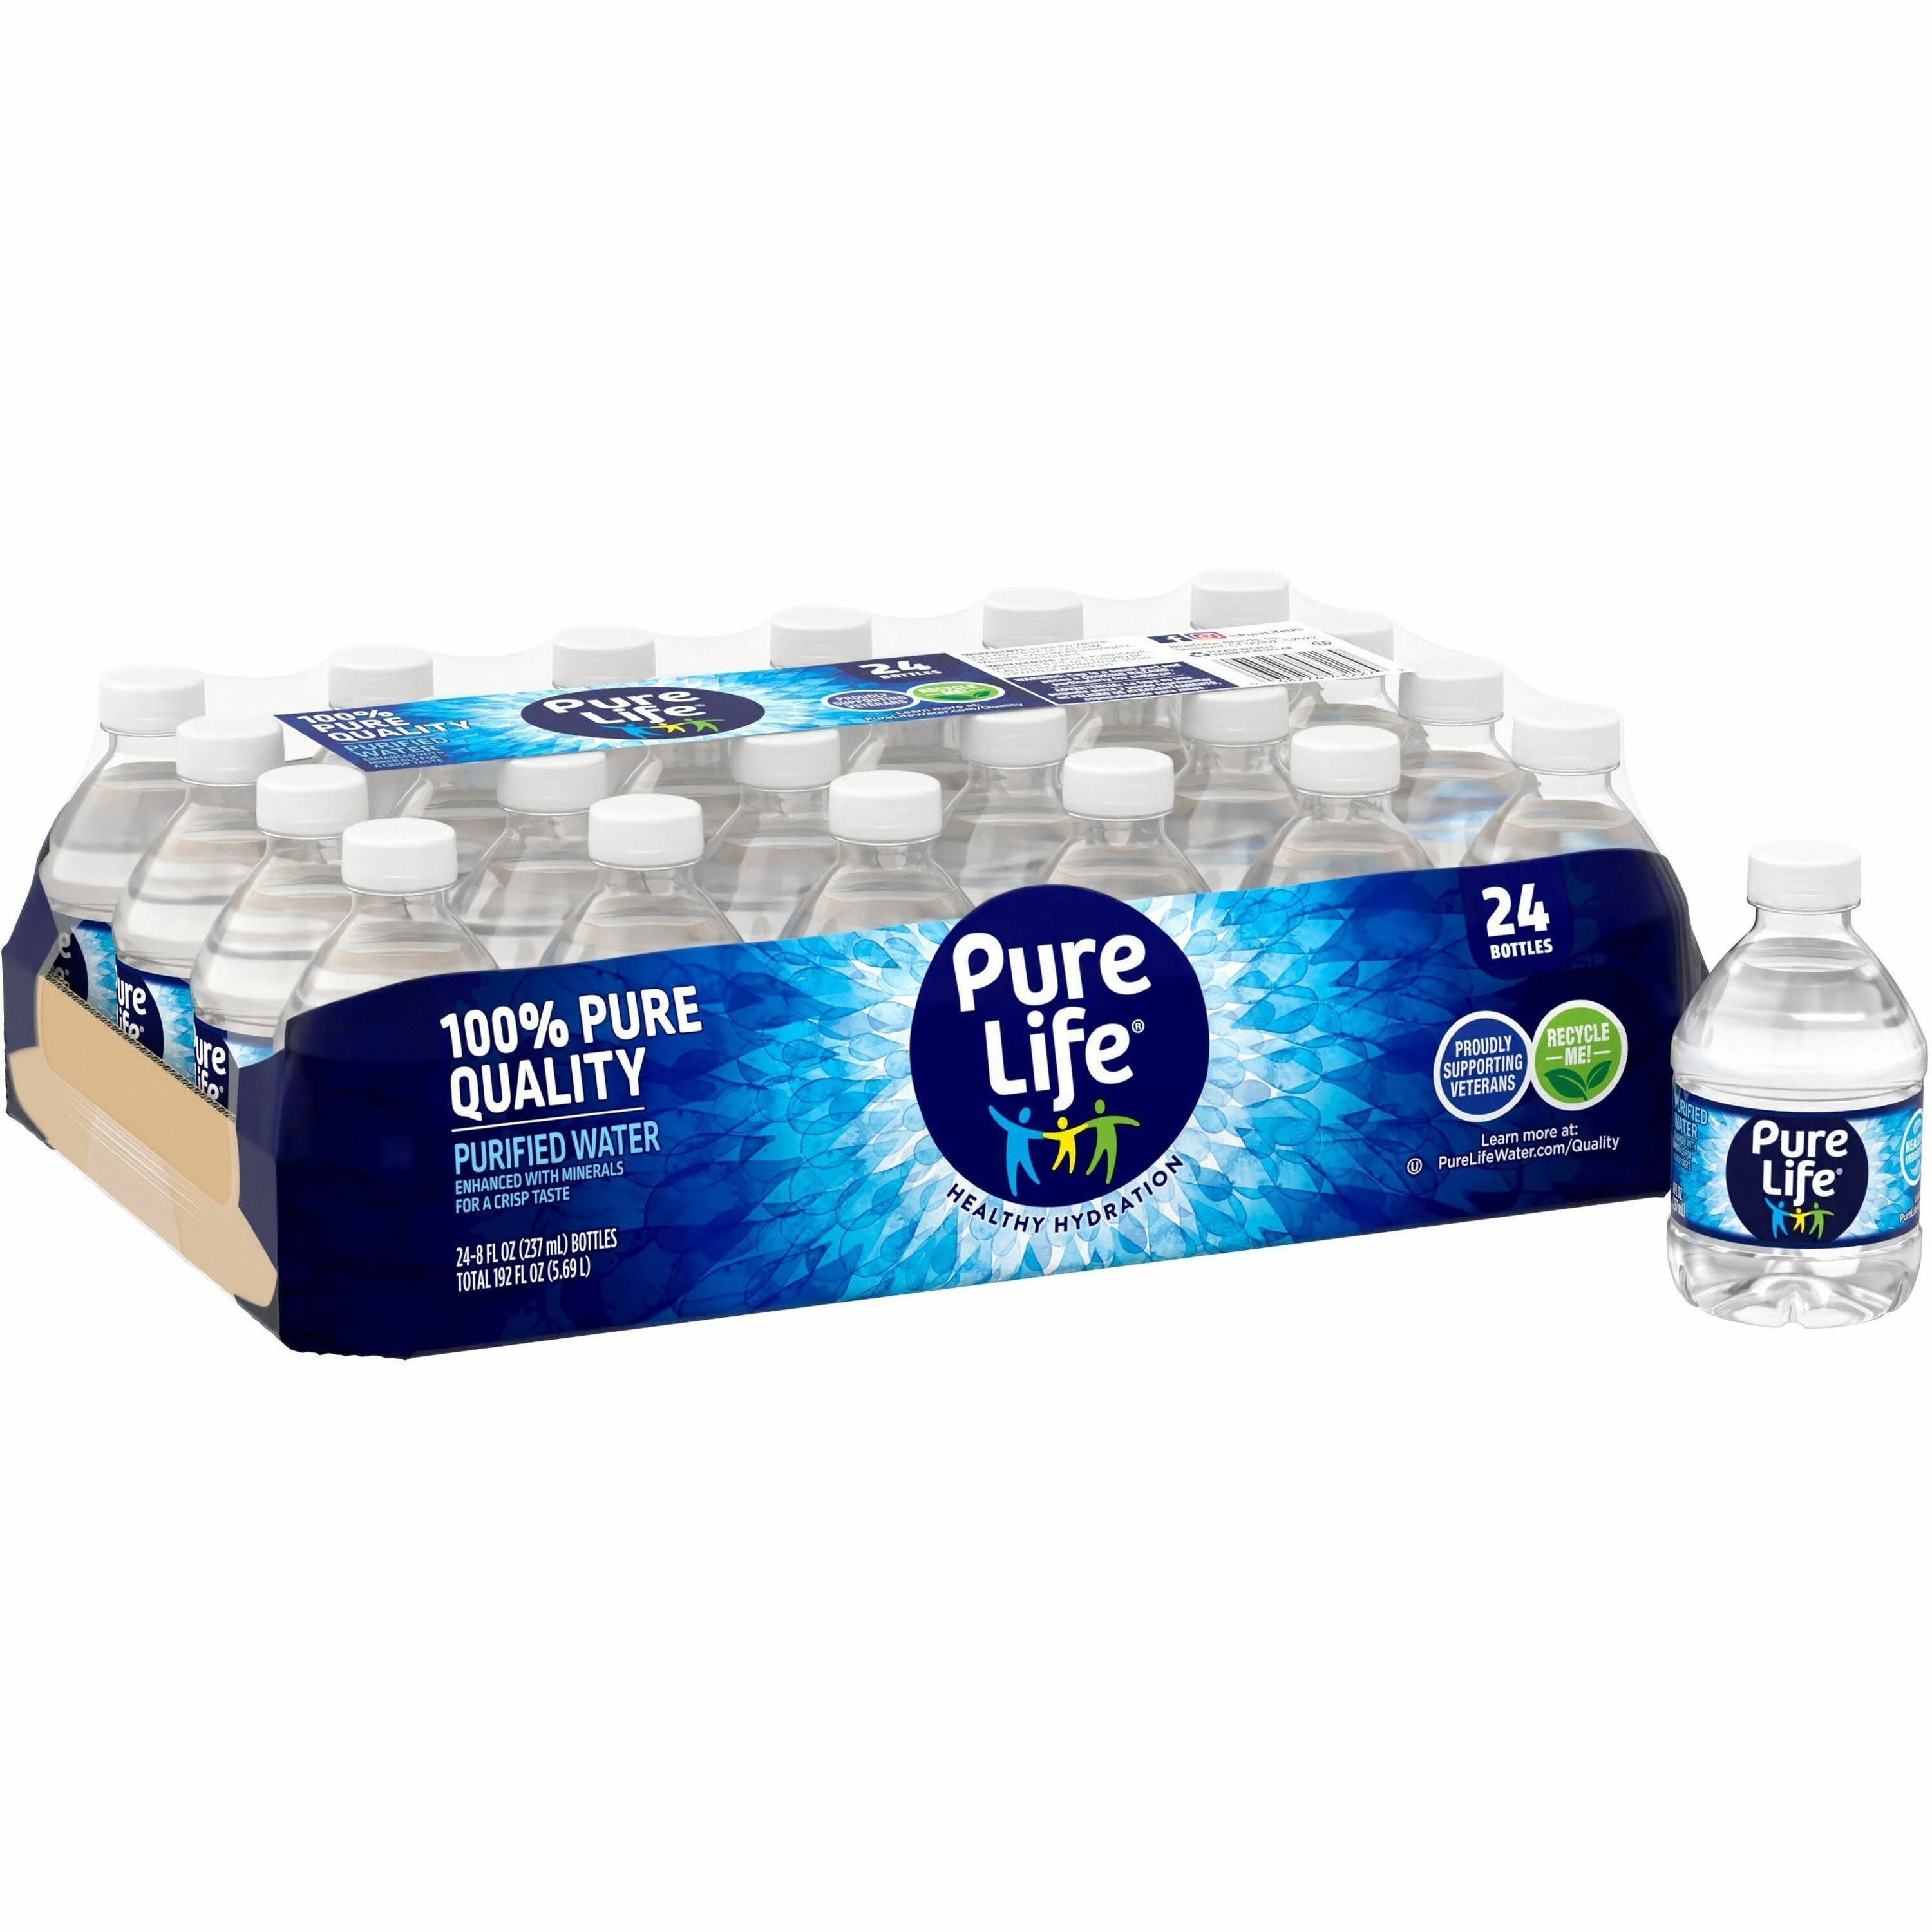 pure-life-purified-bottled-water-ready-to-drink-8-fl-oz-237-ml-bottle-24-carton_nle194627 - 1